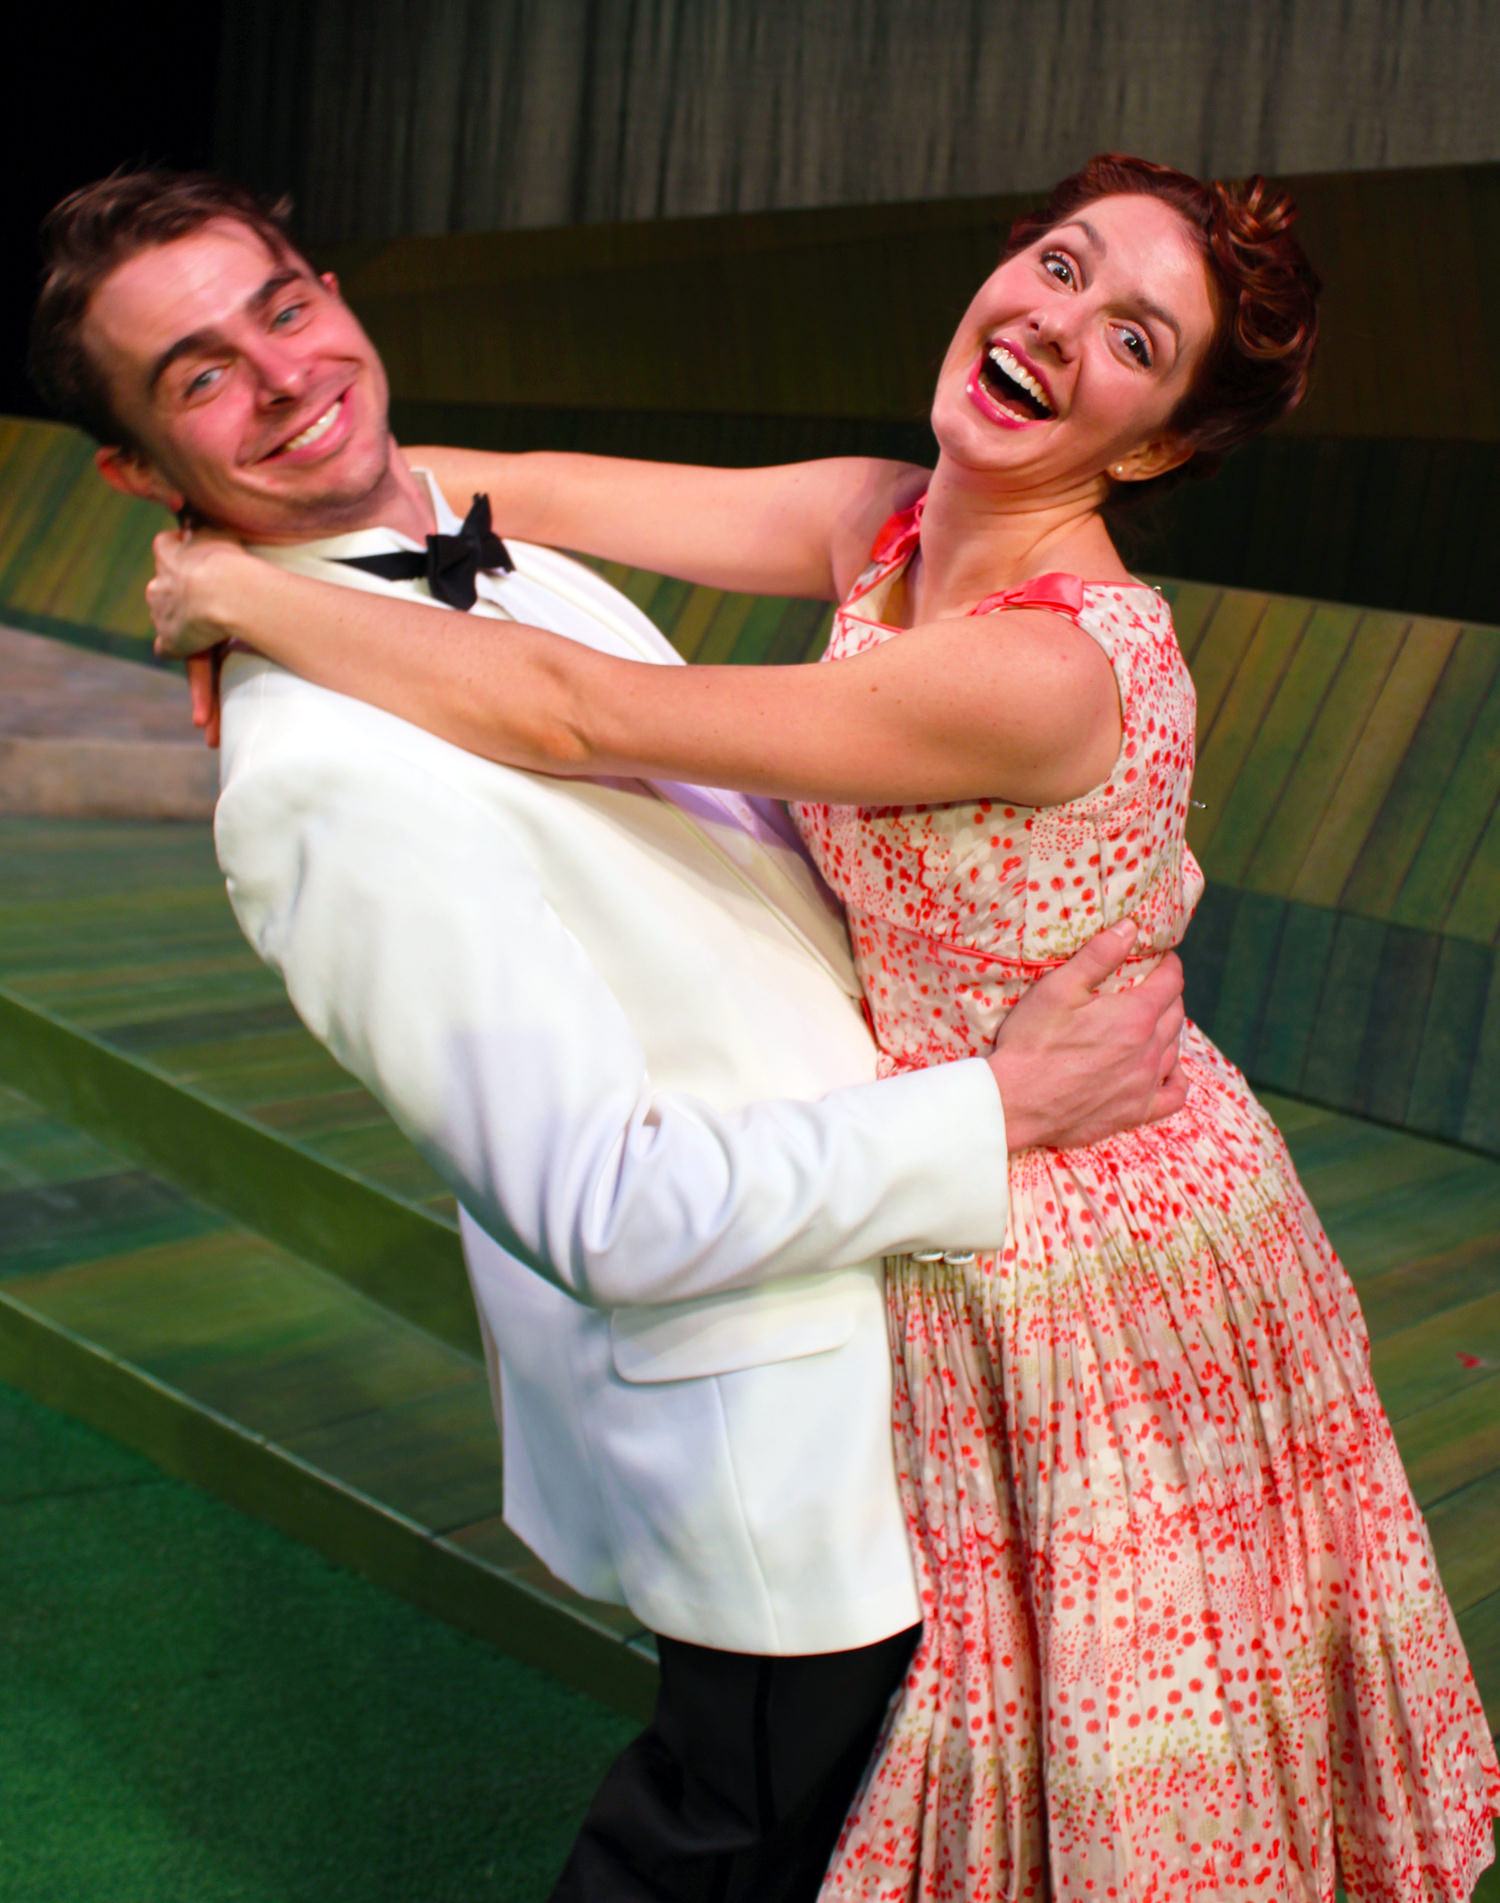 James Jelkin (Benedick) and Sarah Wintermeyer (Beatrice) star in William Shakespeare's Much Ado About Nothing, February 27-March 9 in the Nafe Katter Theatre at Connecticut Repertory Theatre, Storrs, CT. 1